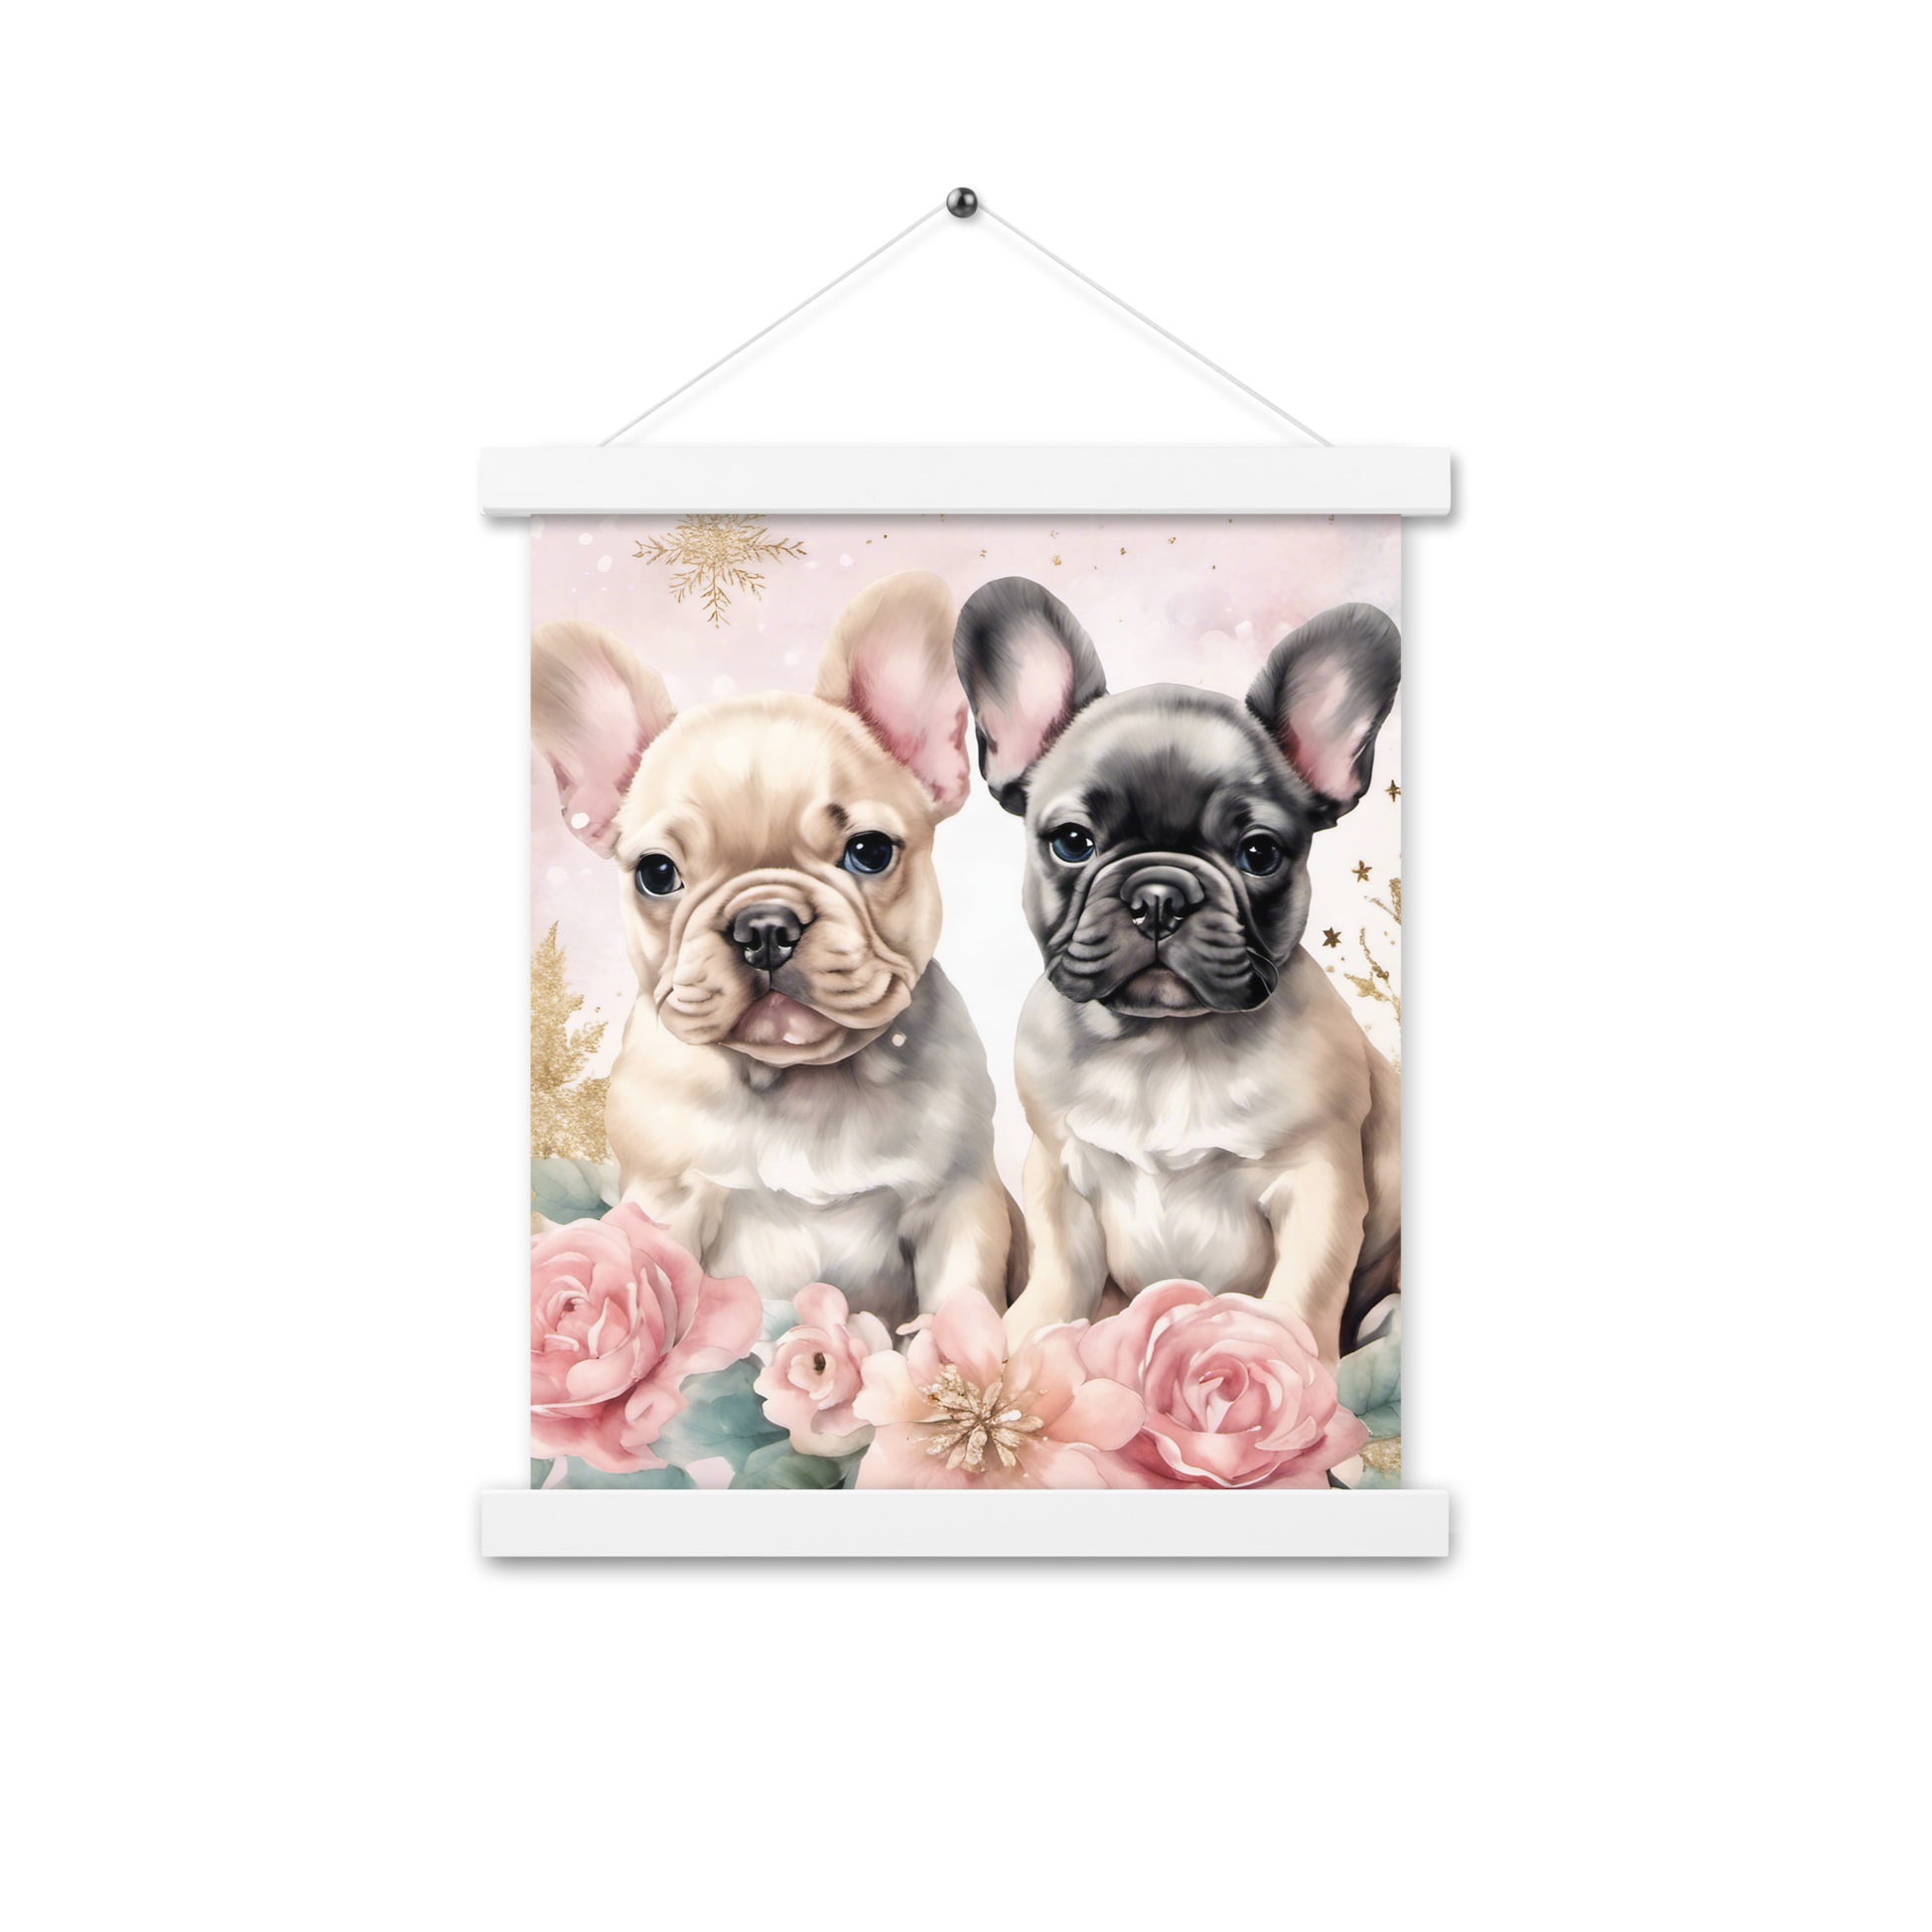 French Bulldog Home Decor Artwork Poster with hangers CedarHill Country Market